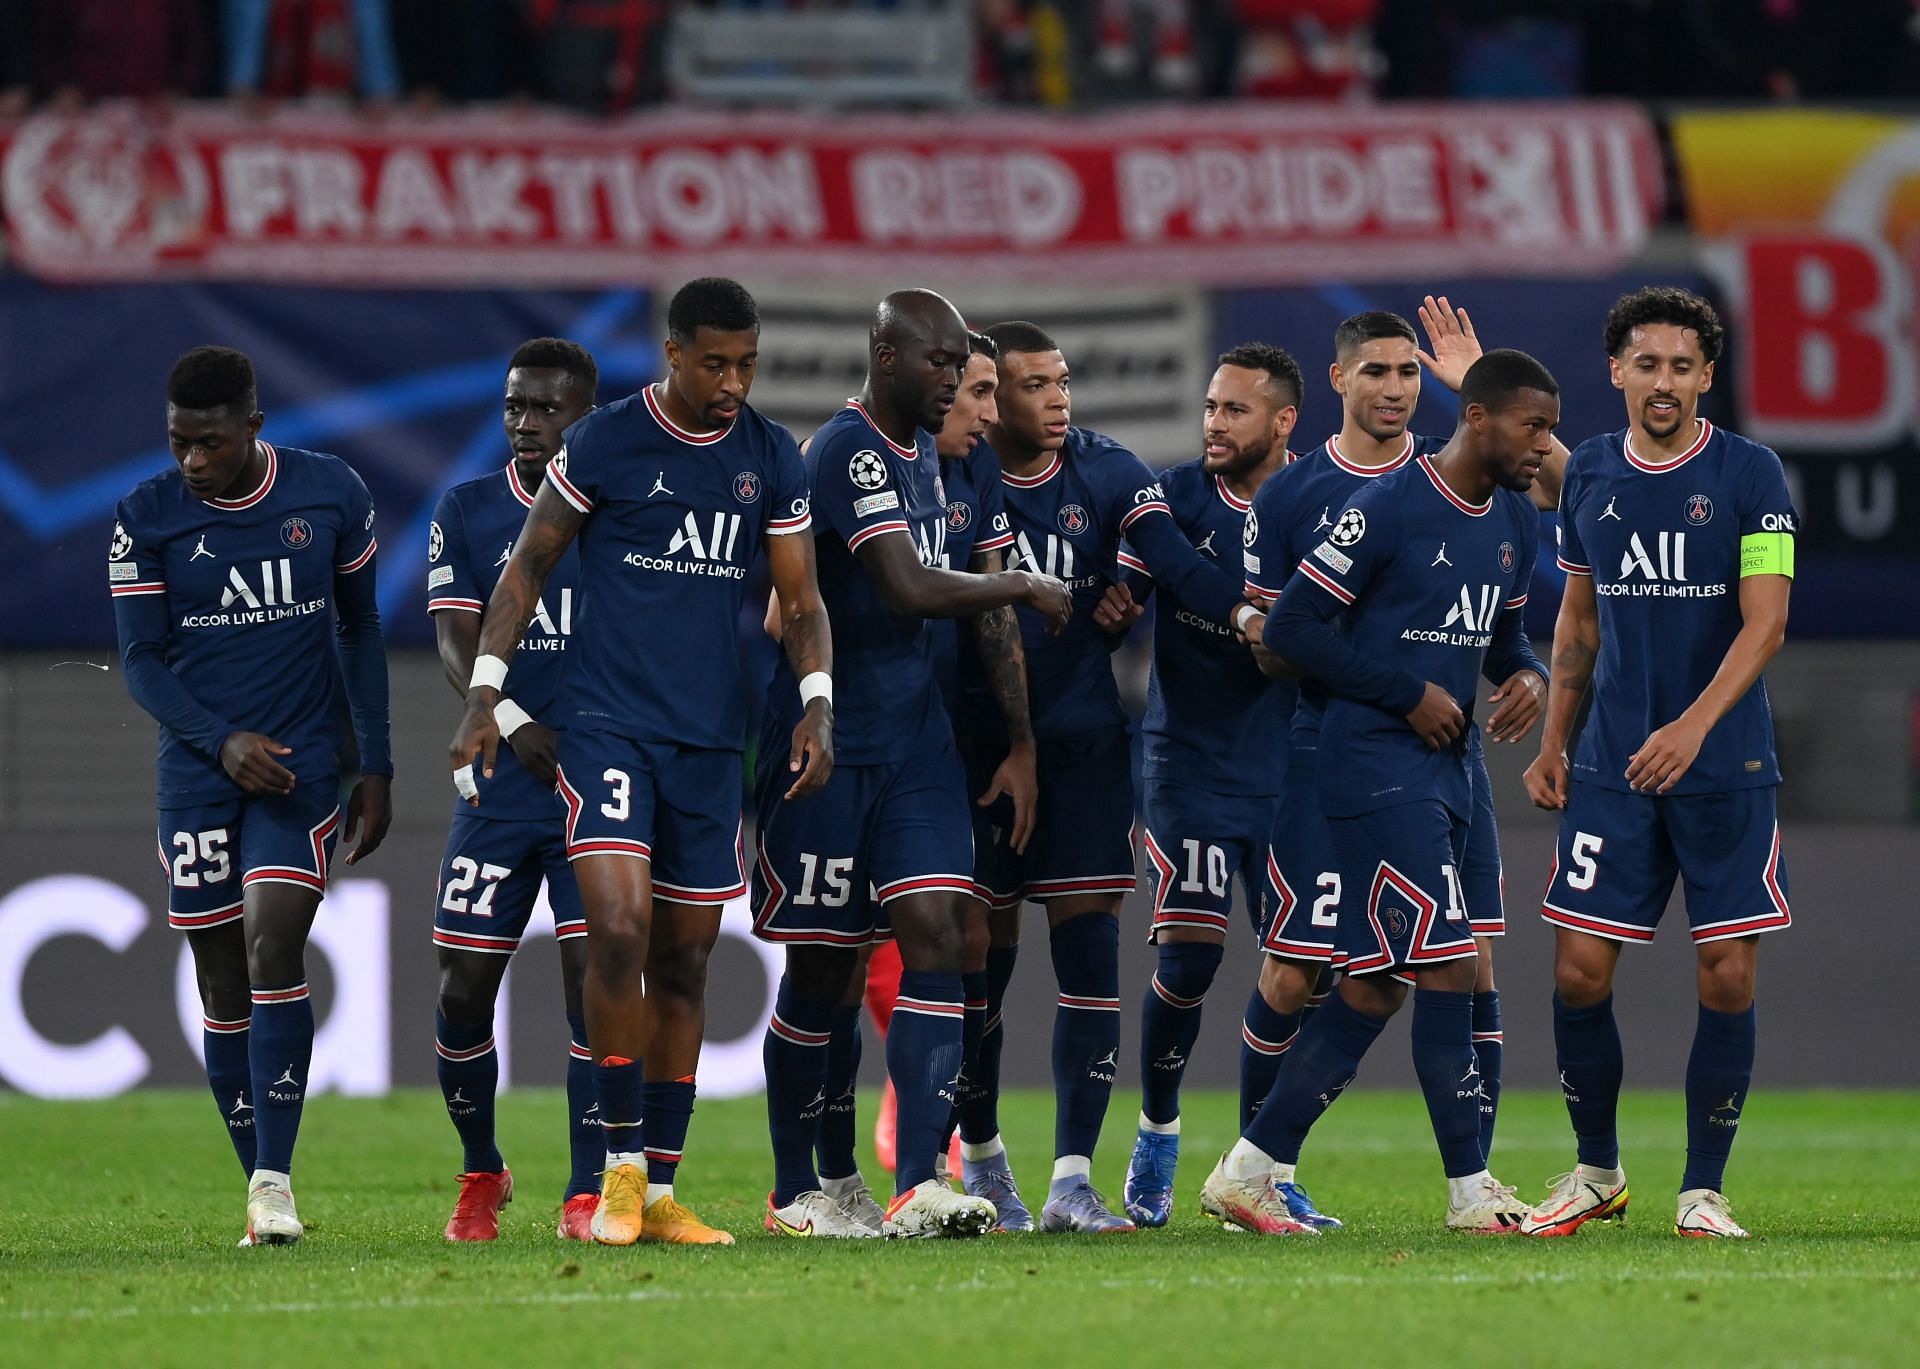 PSG have underwhelmed in the Champions League this season.